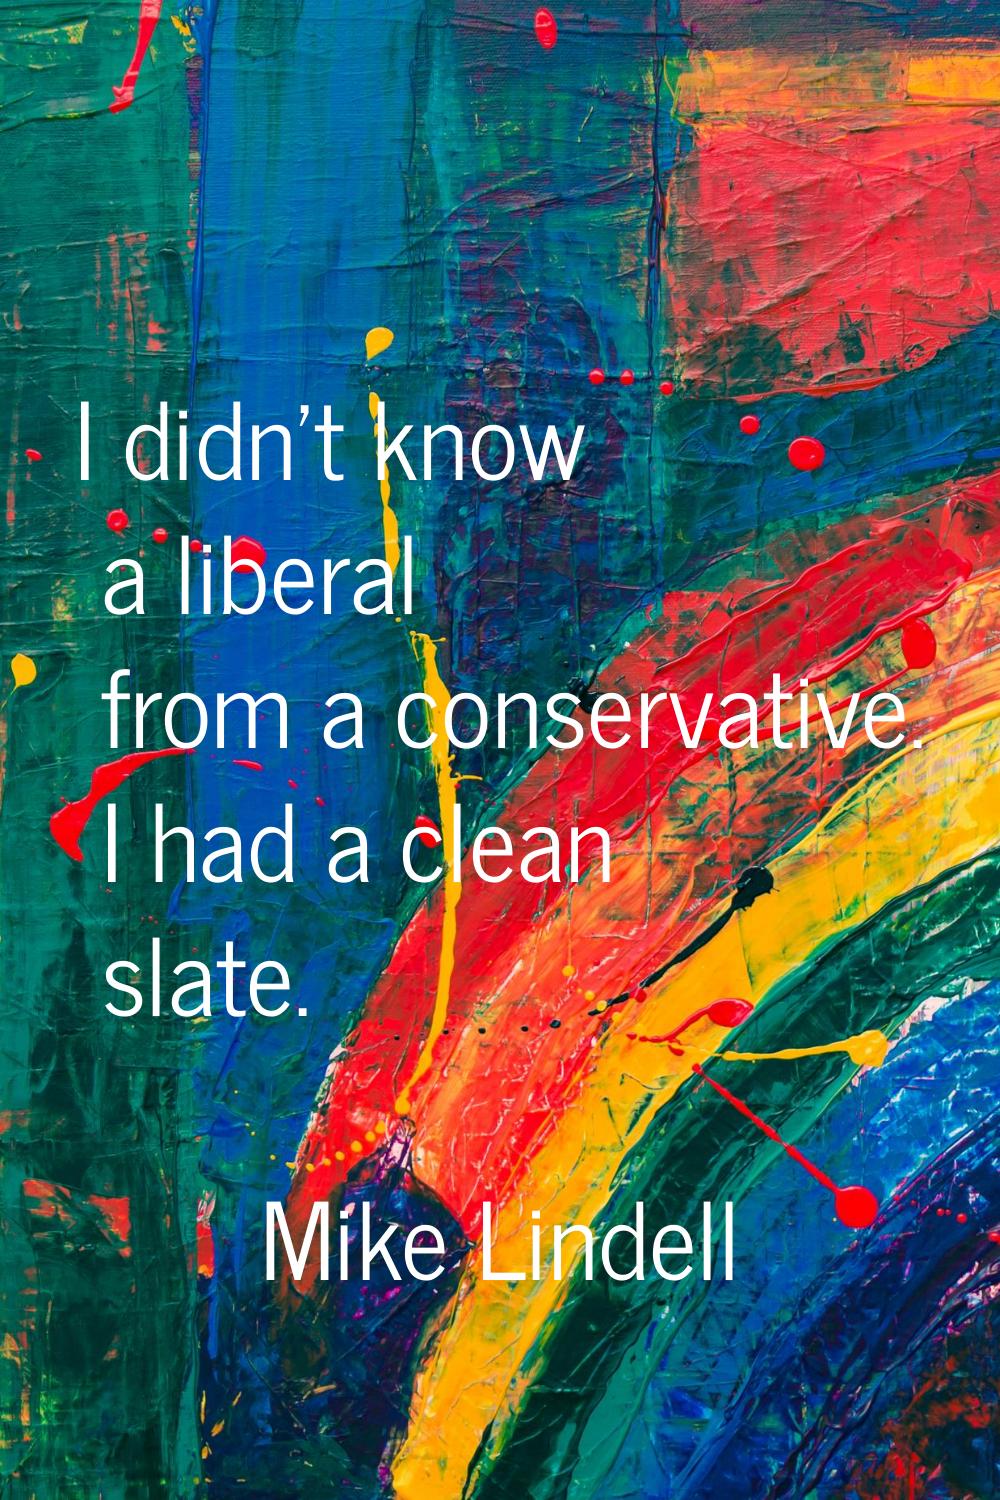 I didn't know a liberal from a conservative. I had a clean slate.